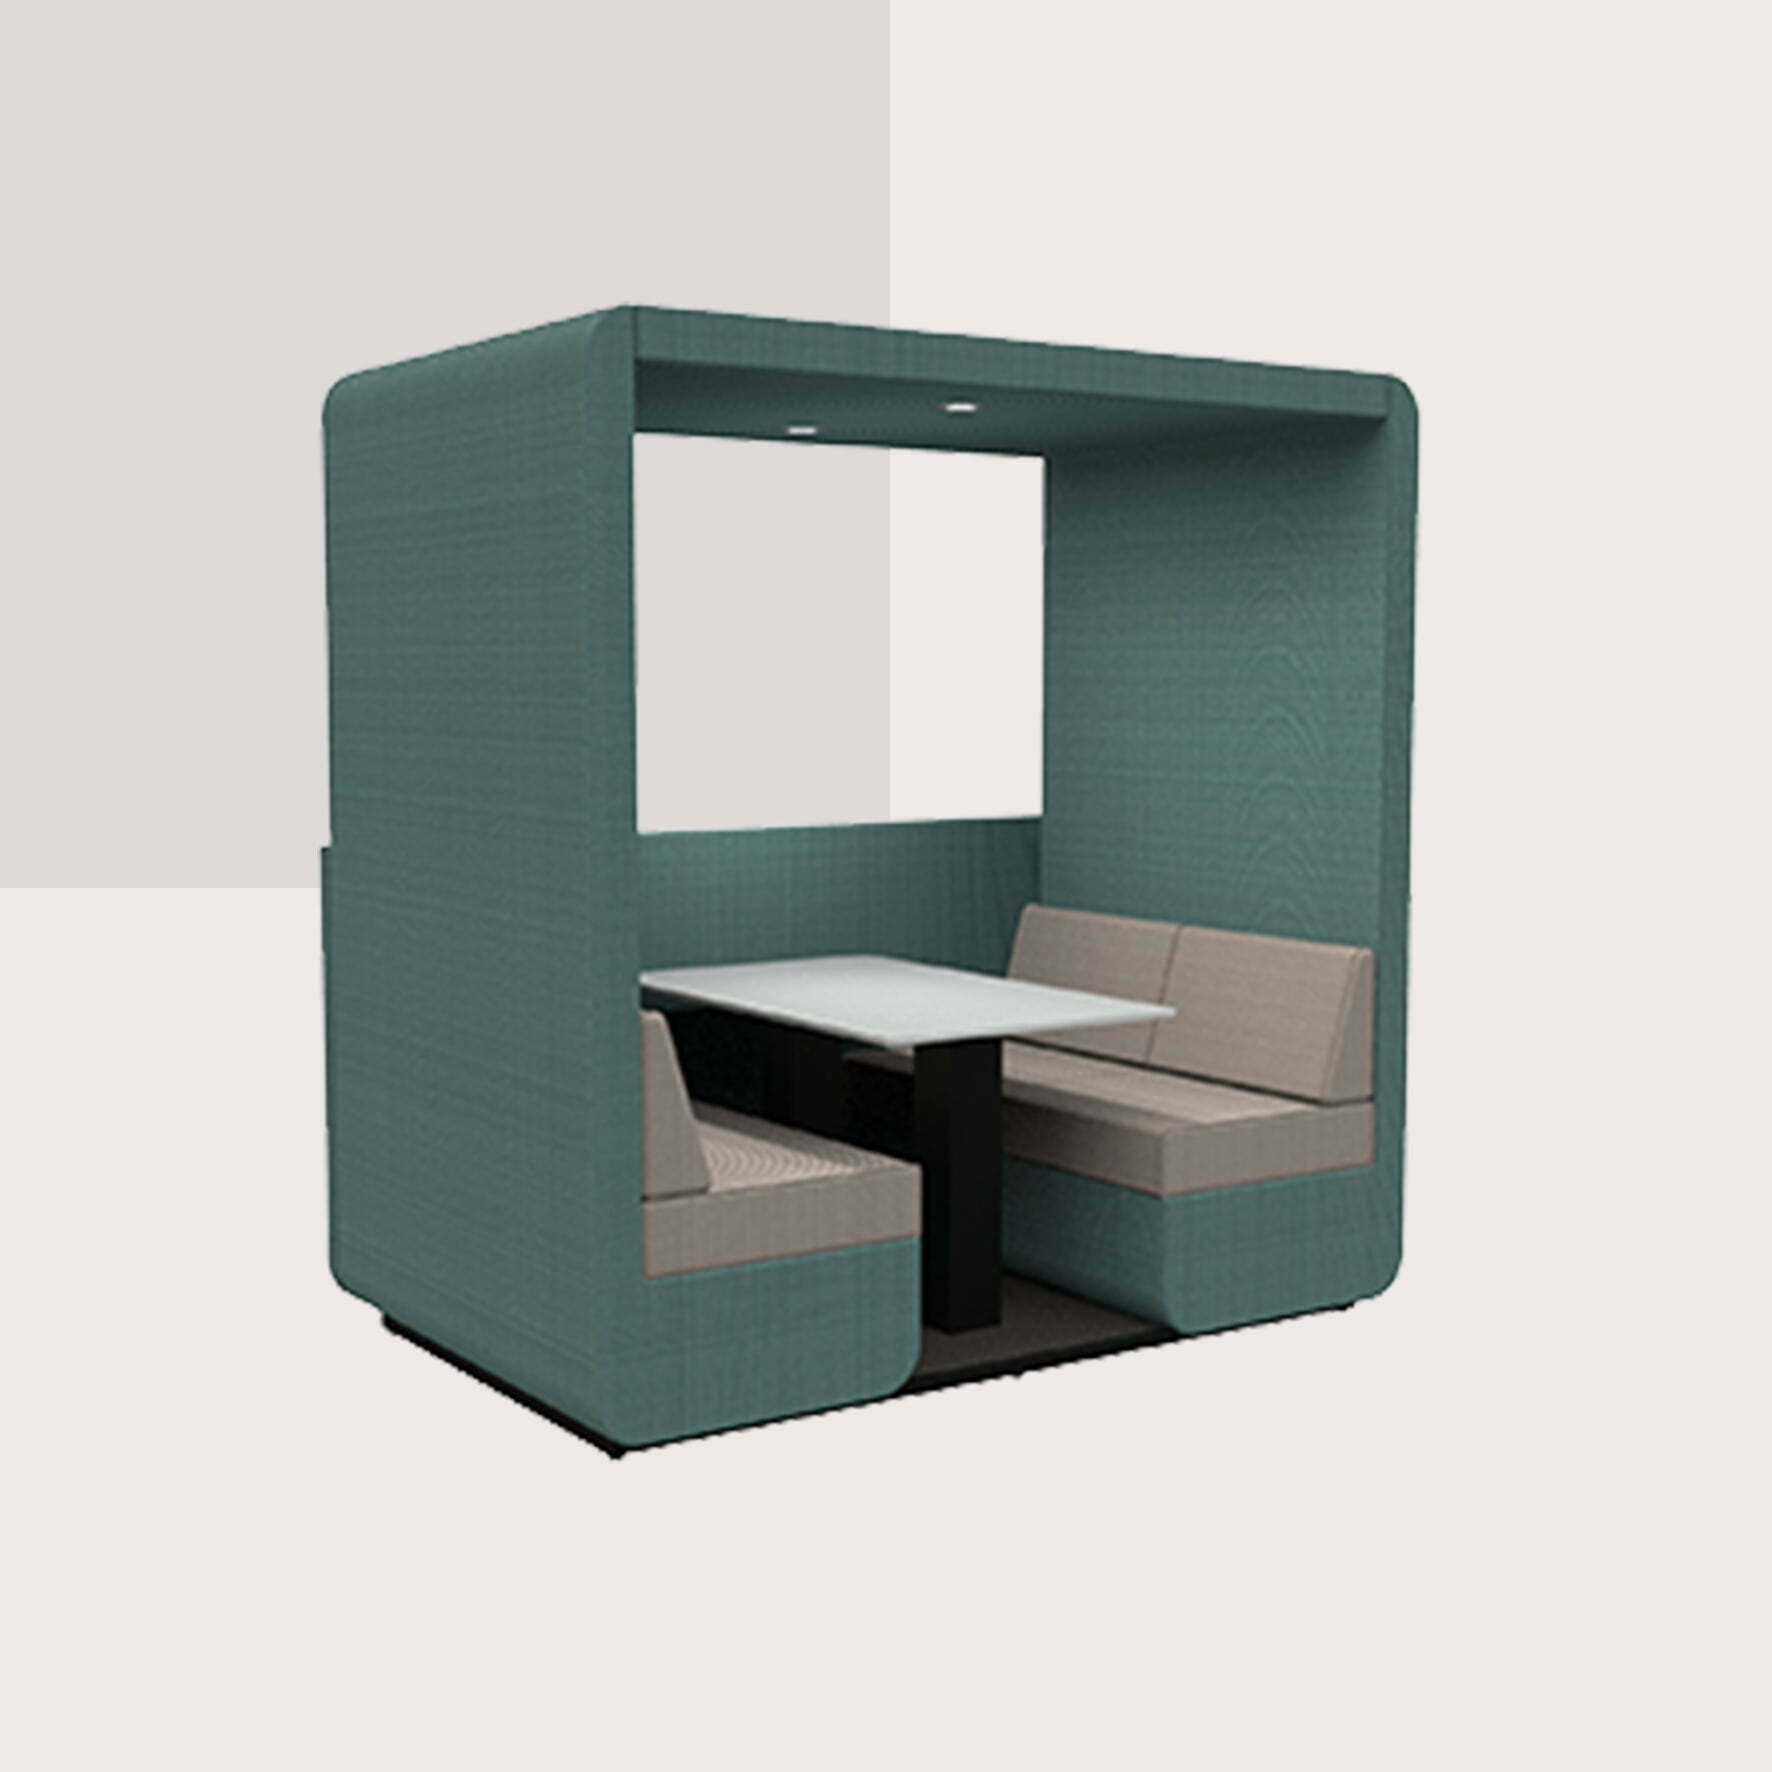 Bob 4 seat booth with half wall